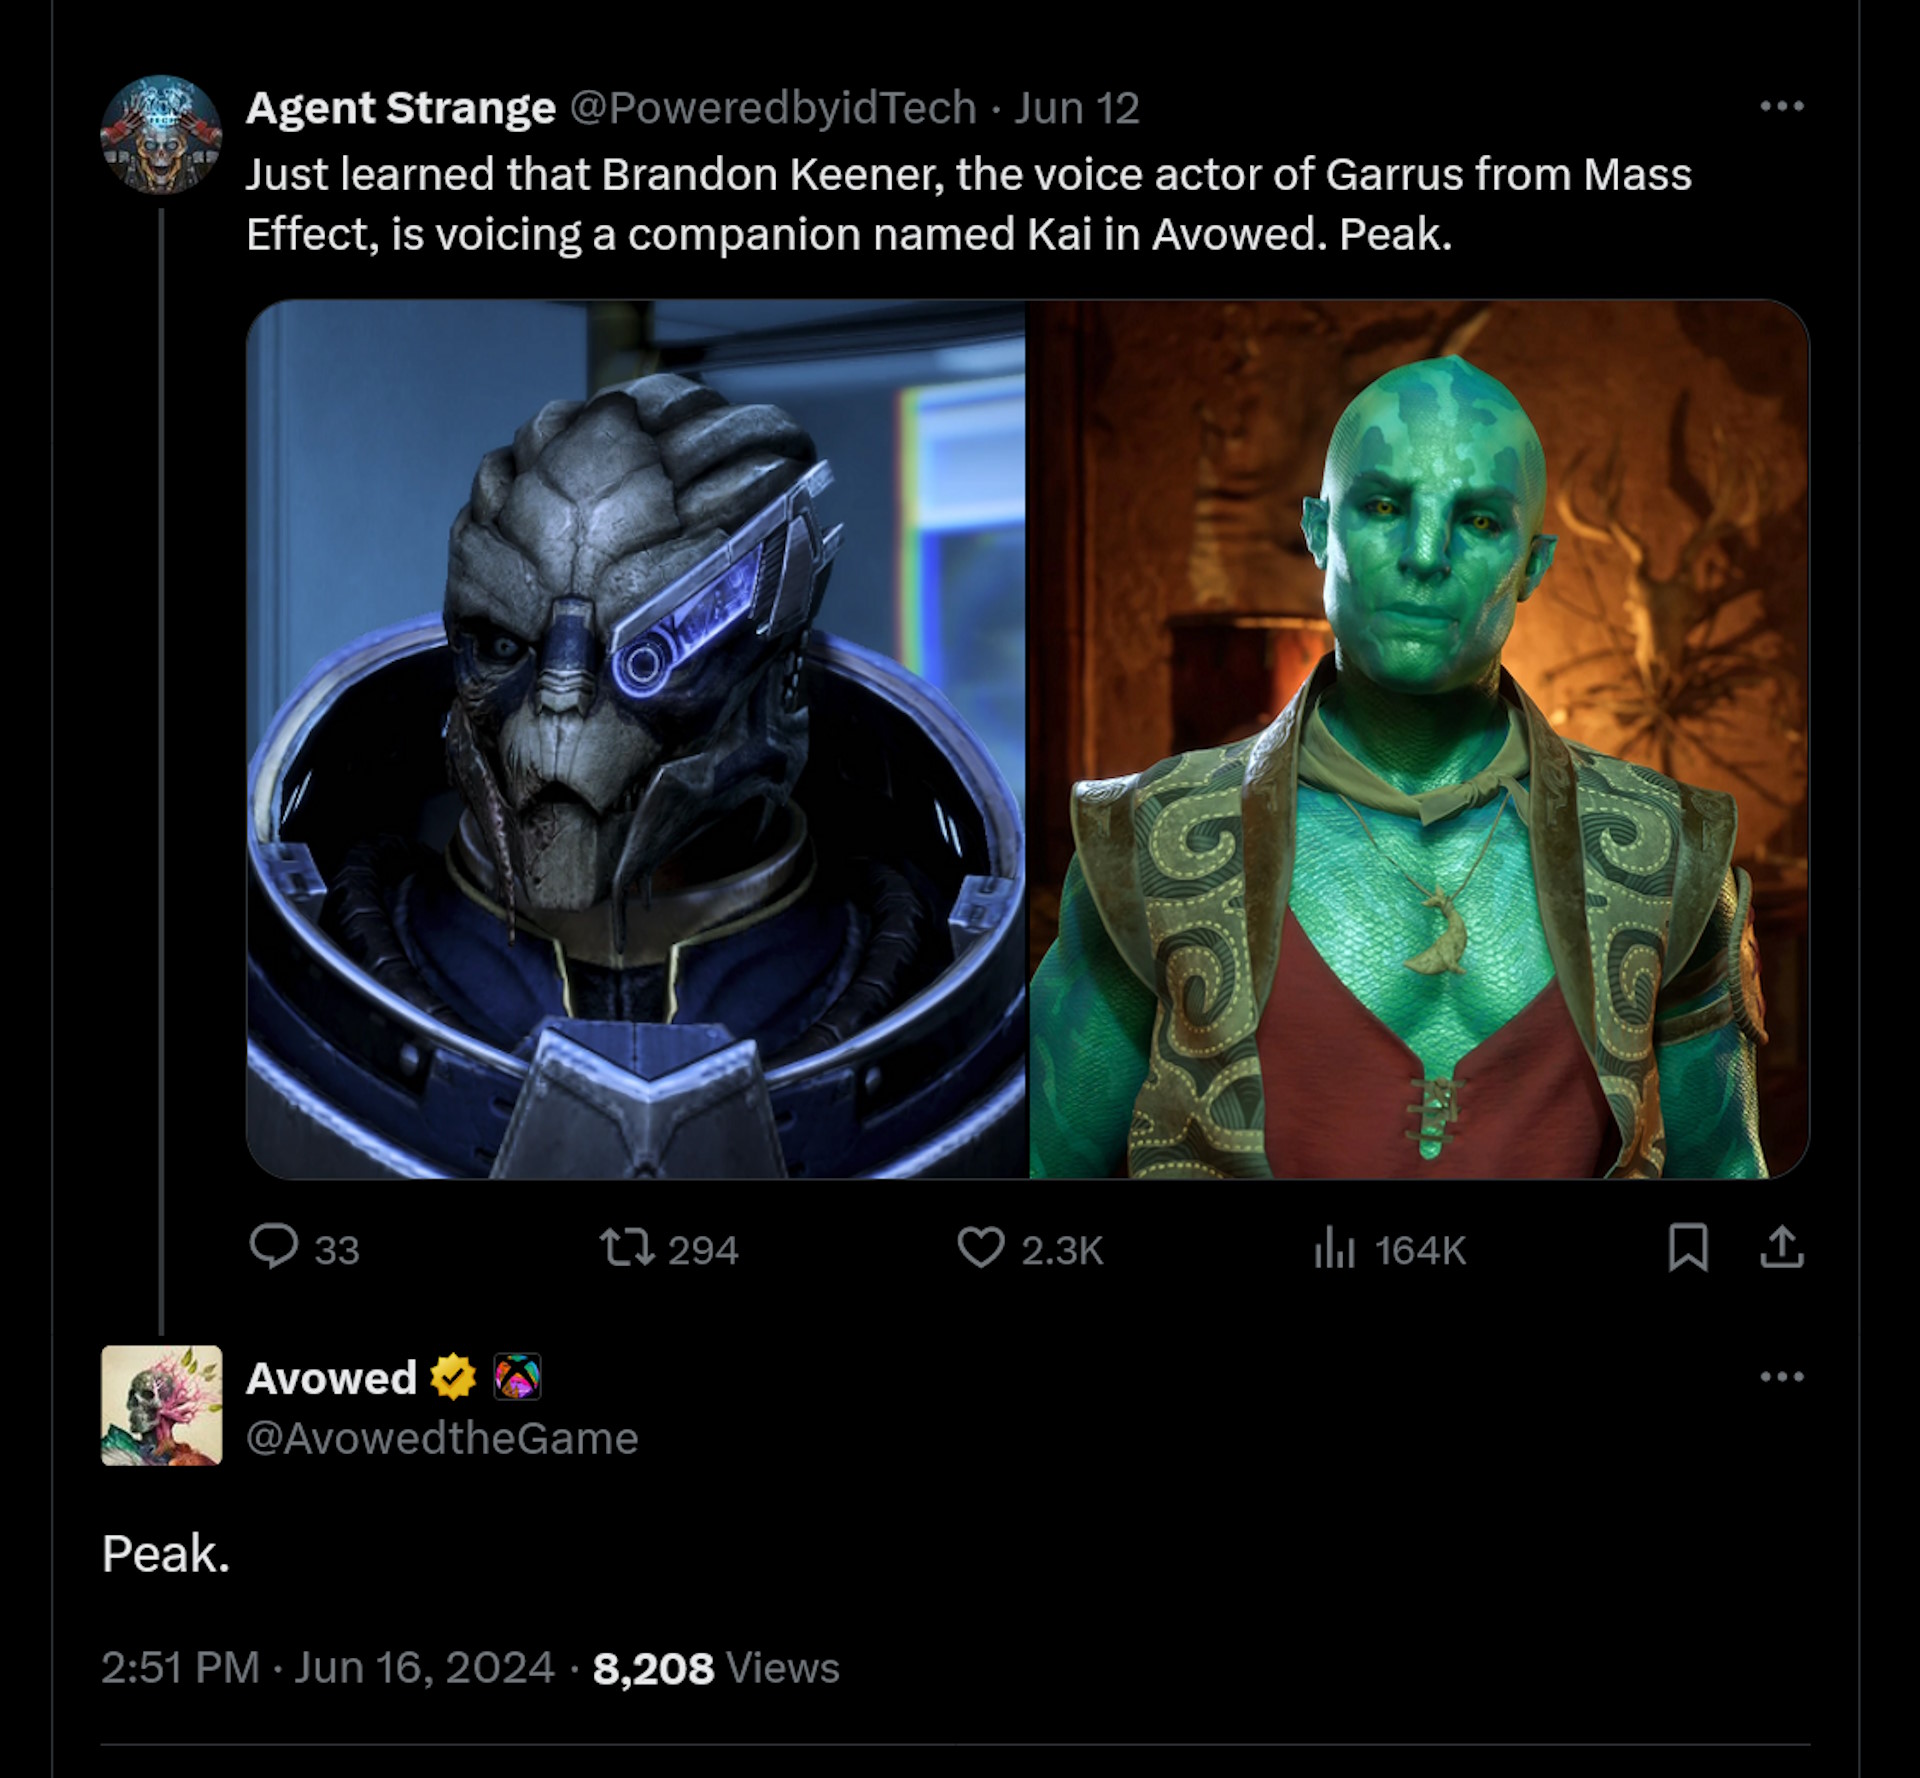 Just learned that Brandon Keener, the voice actor of Garrus from Mass Effect, is voicing a companion named Kai in Avowed. Peak. Peak.